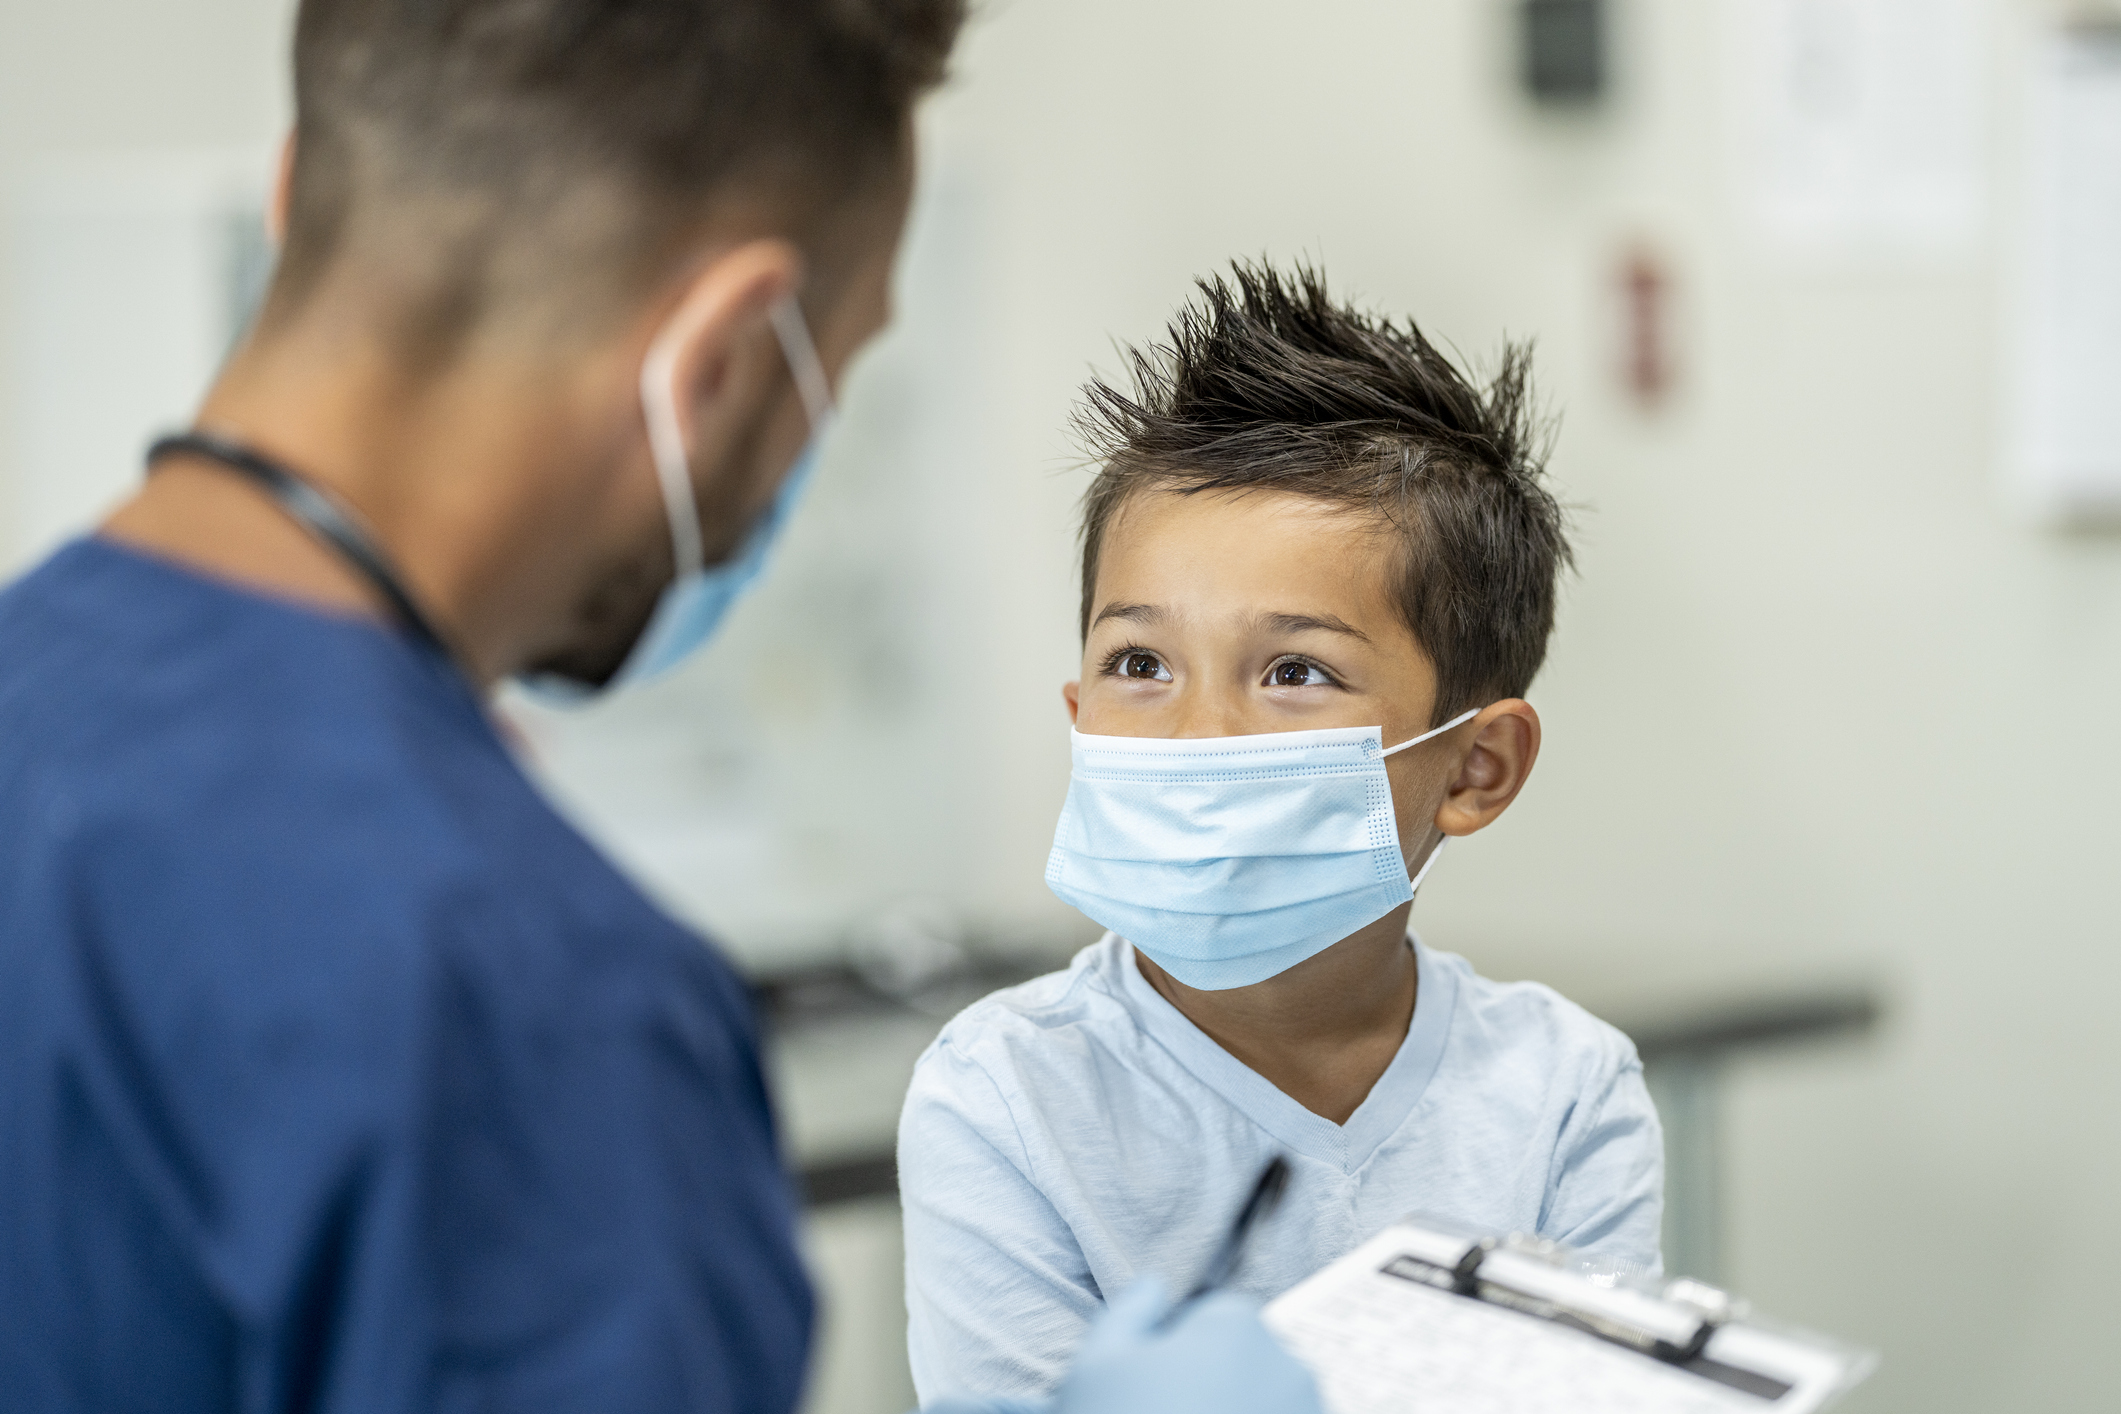 Young boy wearing a mask at a doctors appointment - stock photo